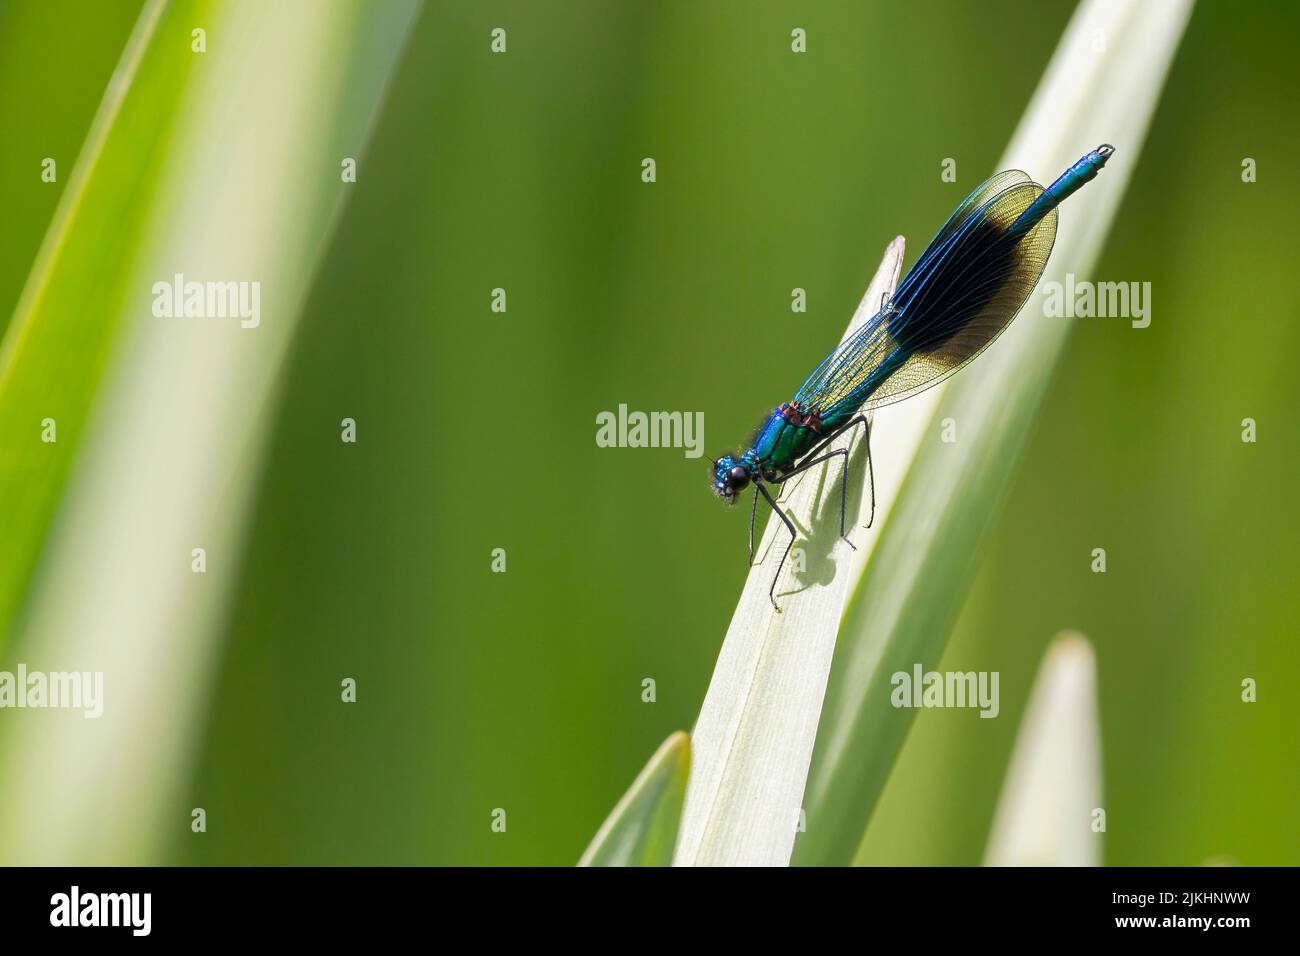 Banded demoiselle (calopteryx splendens) male damselfly with dark blue thumbprint shape on wings, metalic blue green body and small wide apart eyes Stock Photo